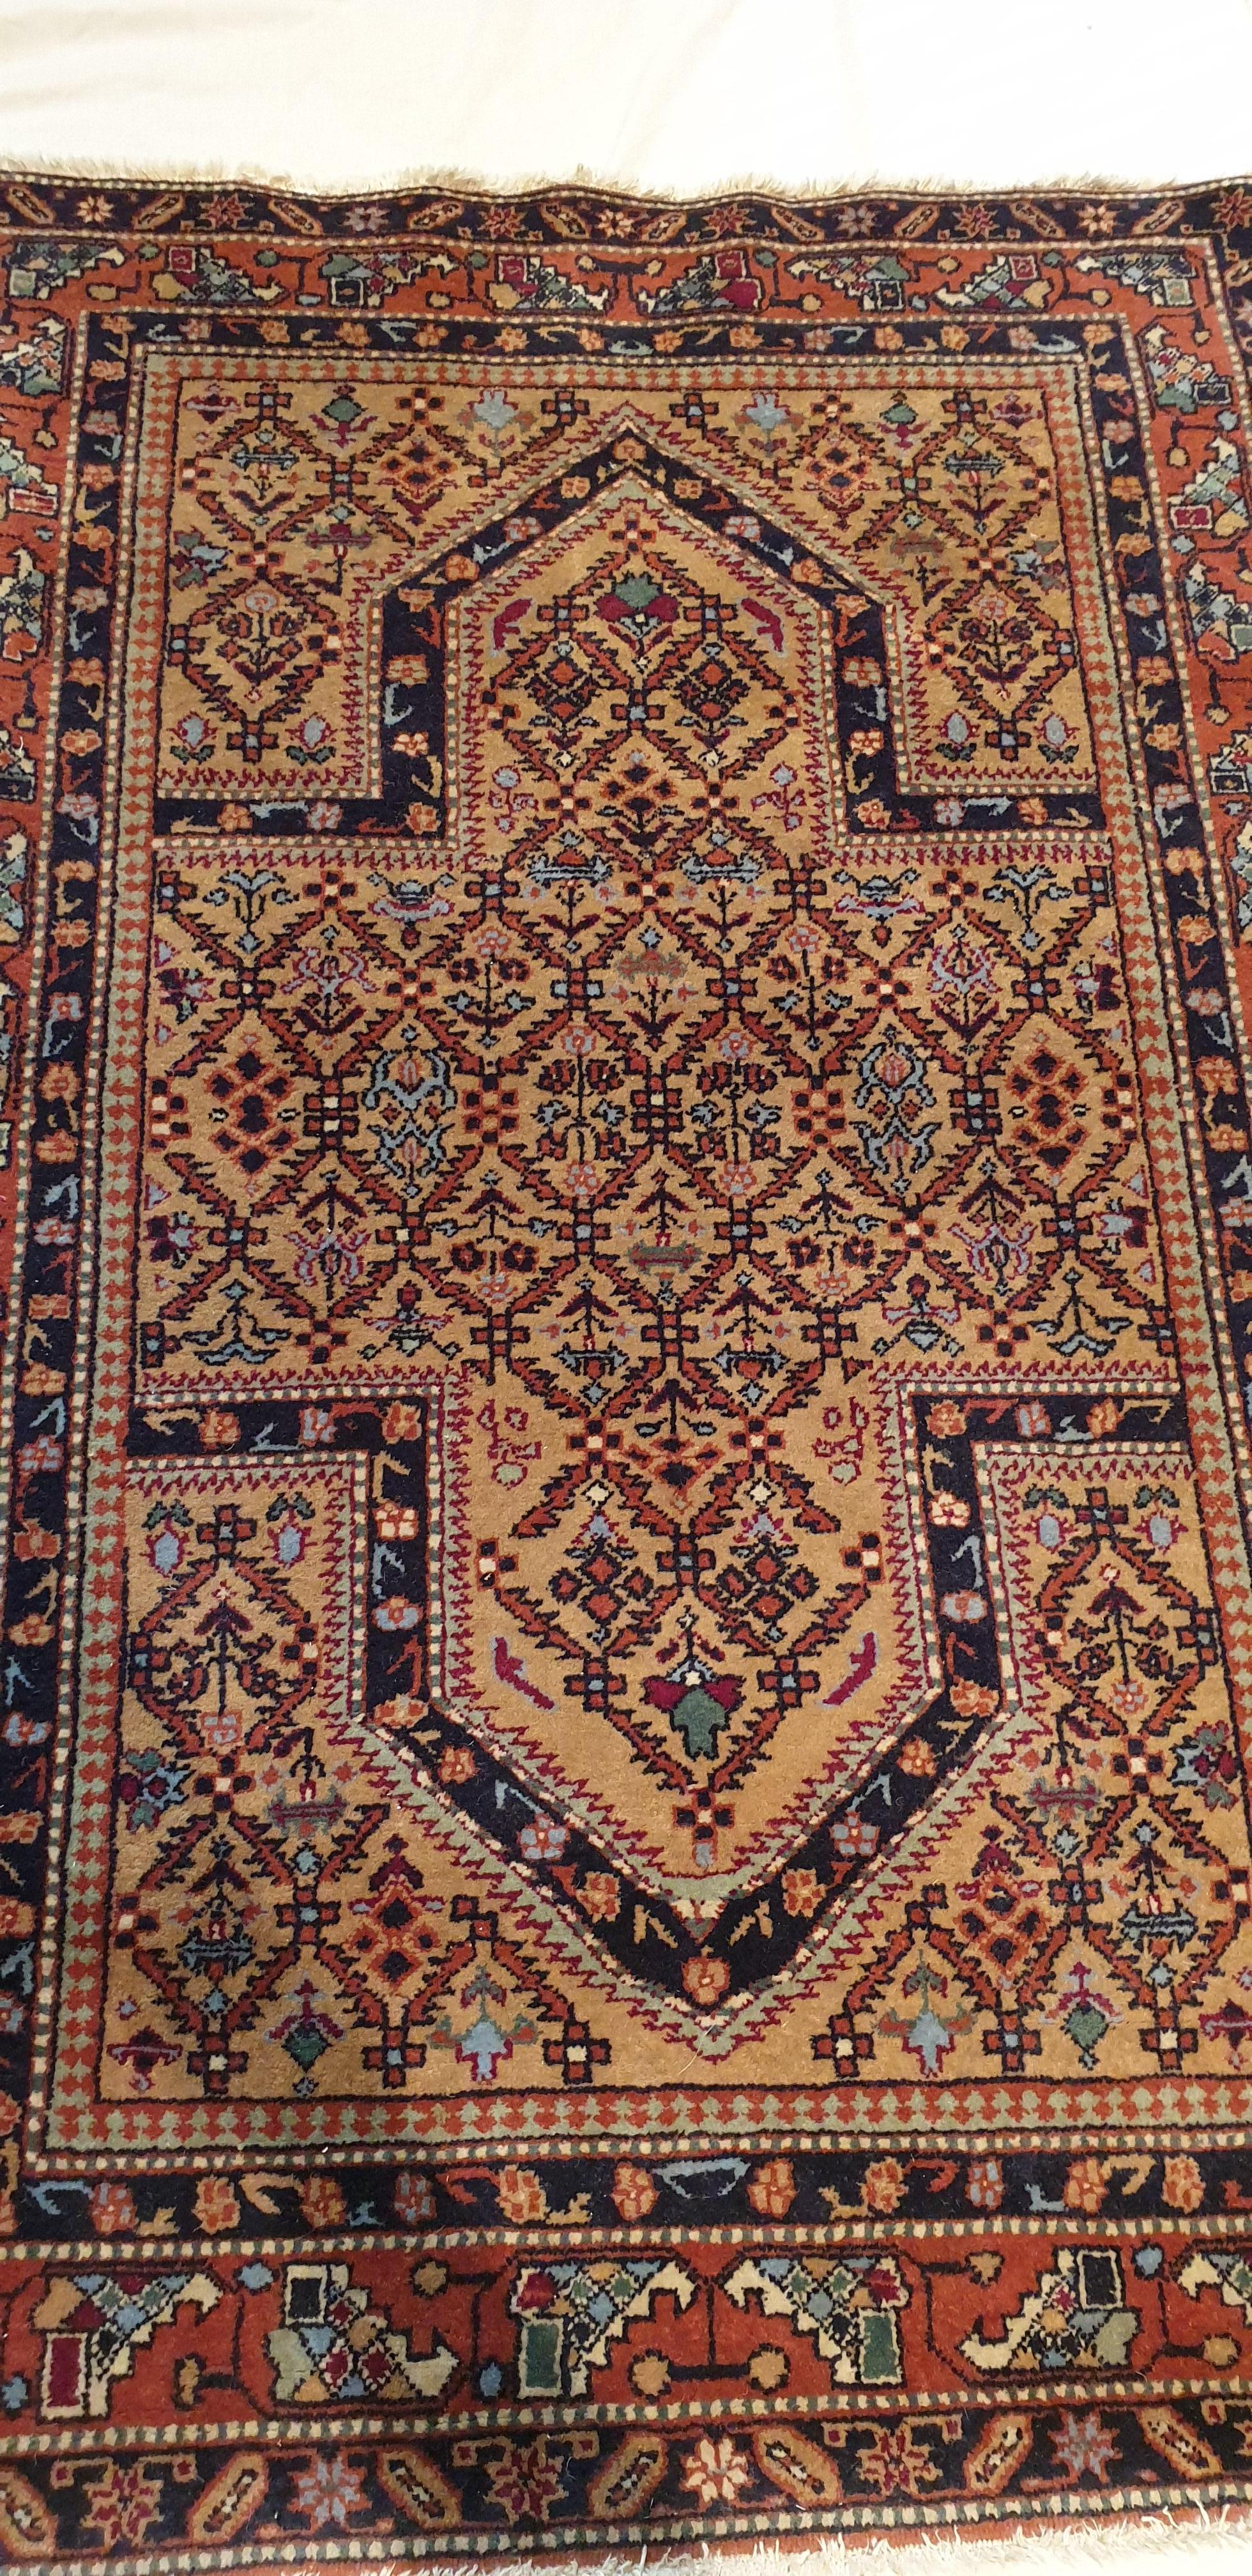 N° 730, hand knotted Caucasian carpet style chirvan from 19th century.
High quality, beautiful graphics and remarkable finesse.
Perfect state of preservation.

Measures: 150 x 100 cm.